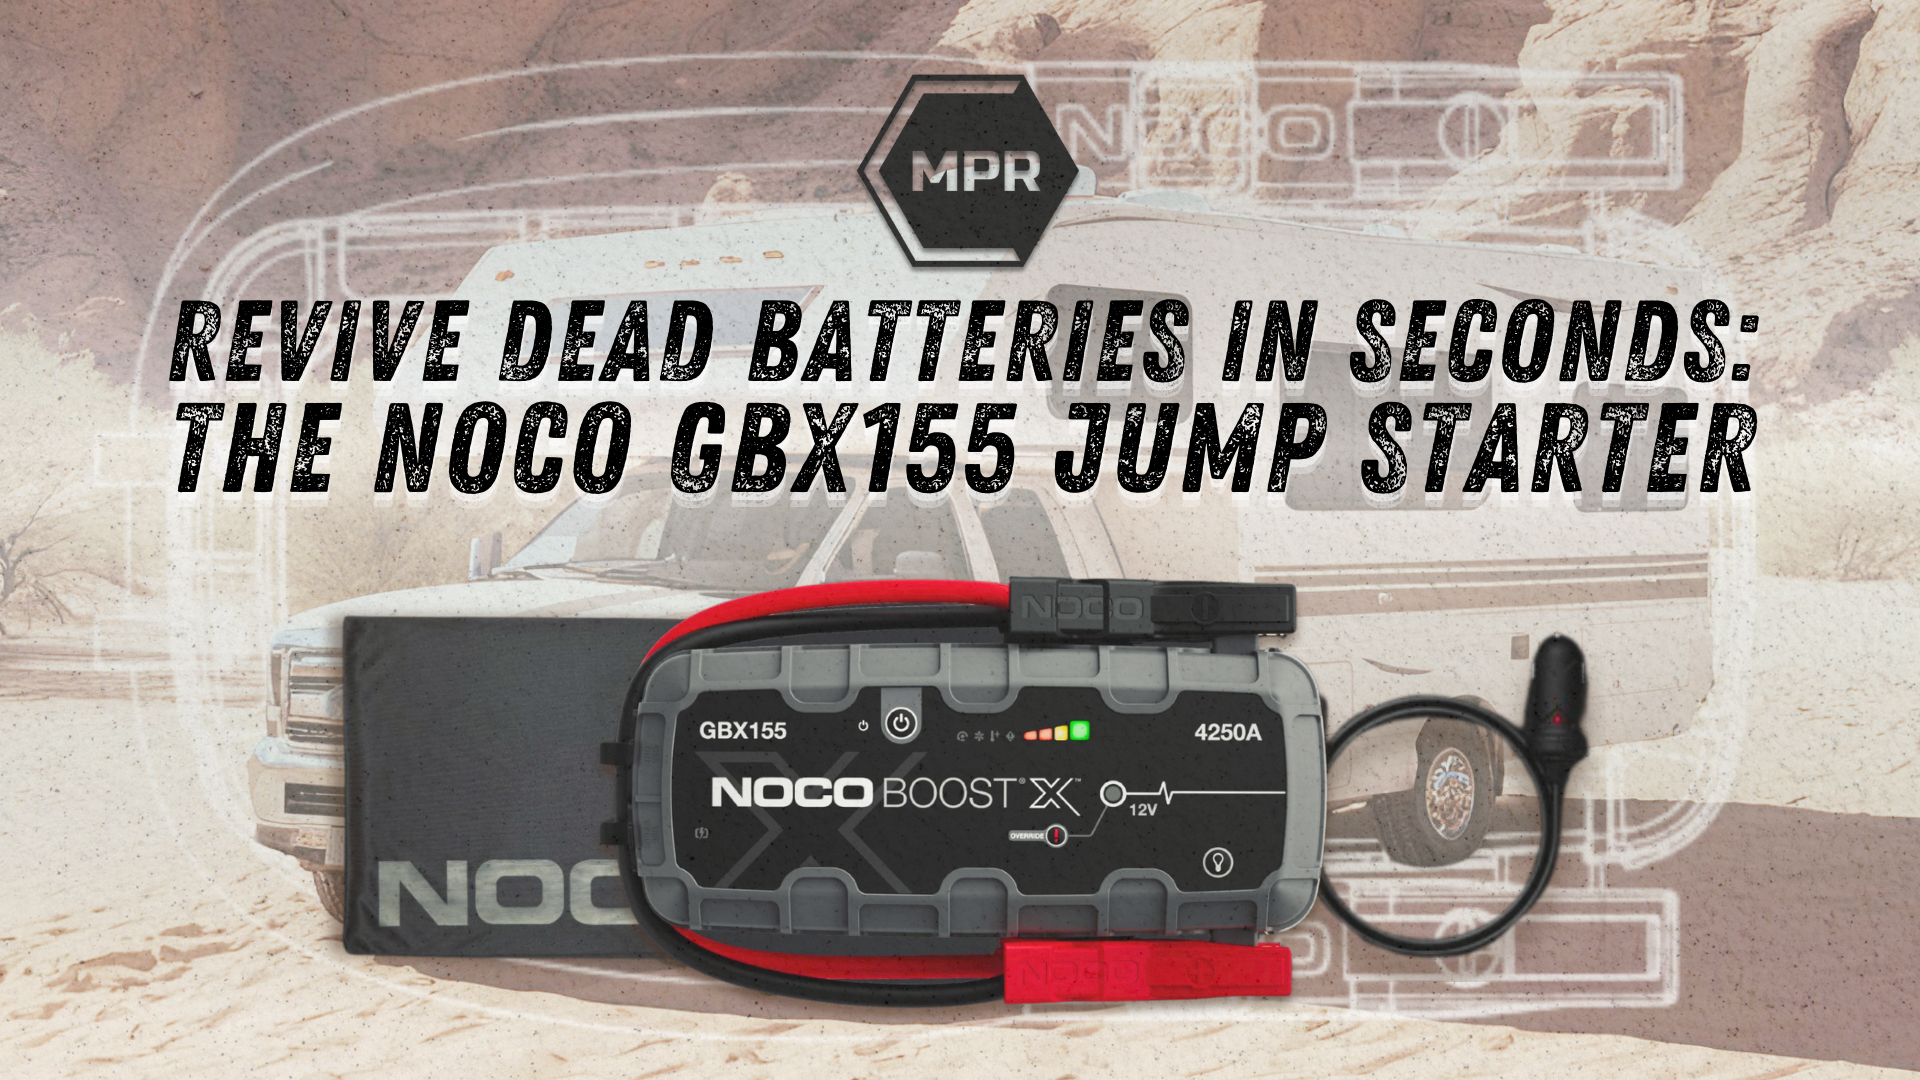 Revive Dead Batteries in Seconds: NOCO GBX155 Jump Starter